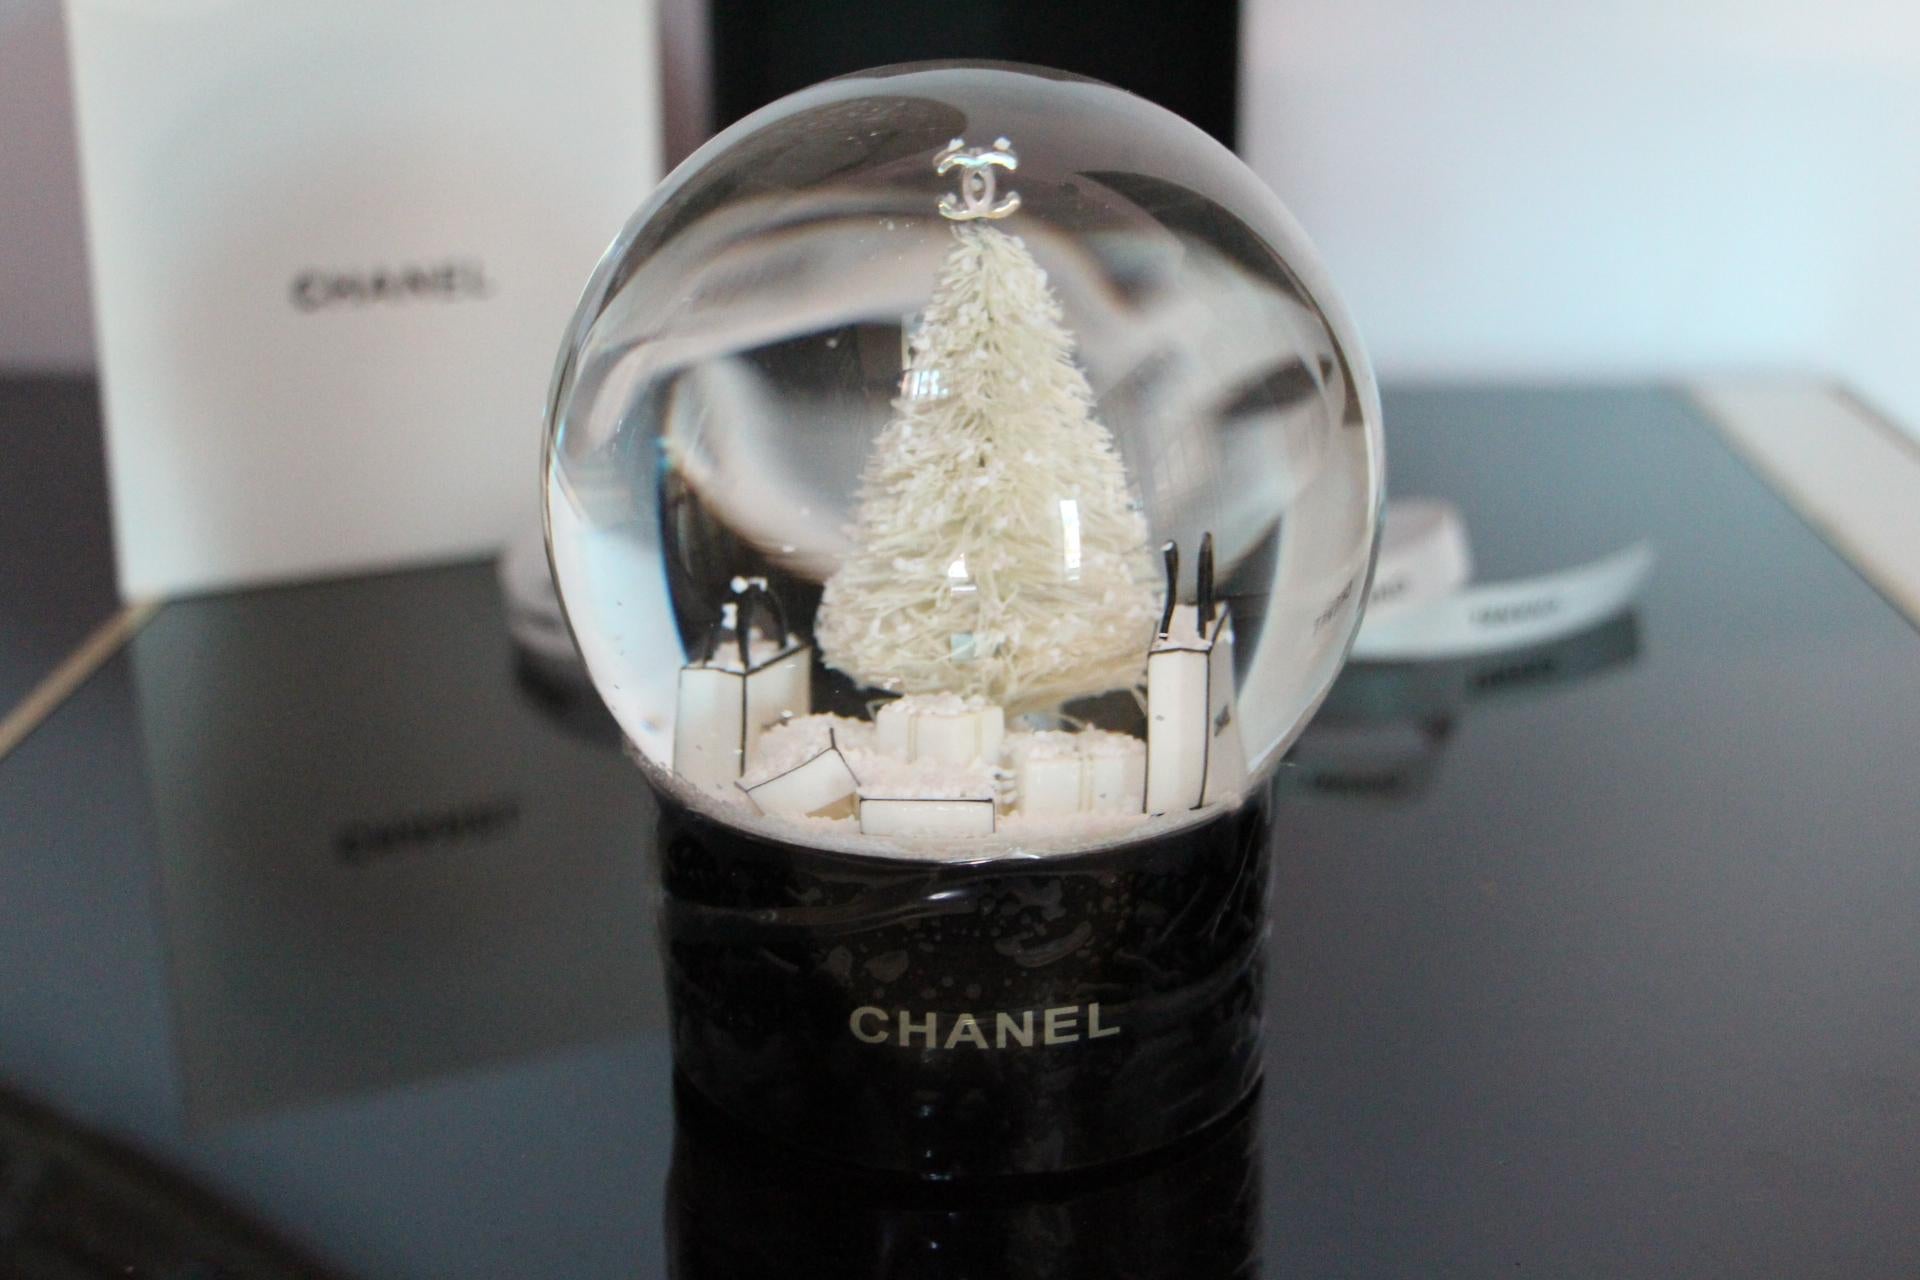 This magnificent globe was made in 2013 as a special edition for limited Chanel VIP customers.
It features a white Christmas tree and Chanel gift bags.
Many very mobile snow flakes.
It is a very decorative piece for Chanel lovers, a must